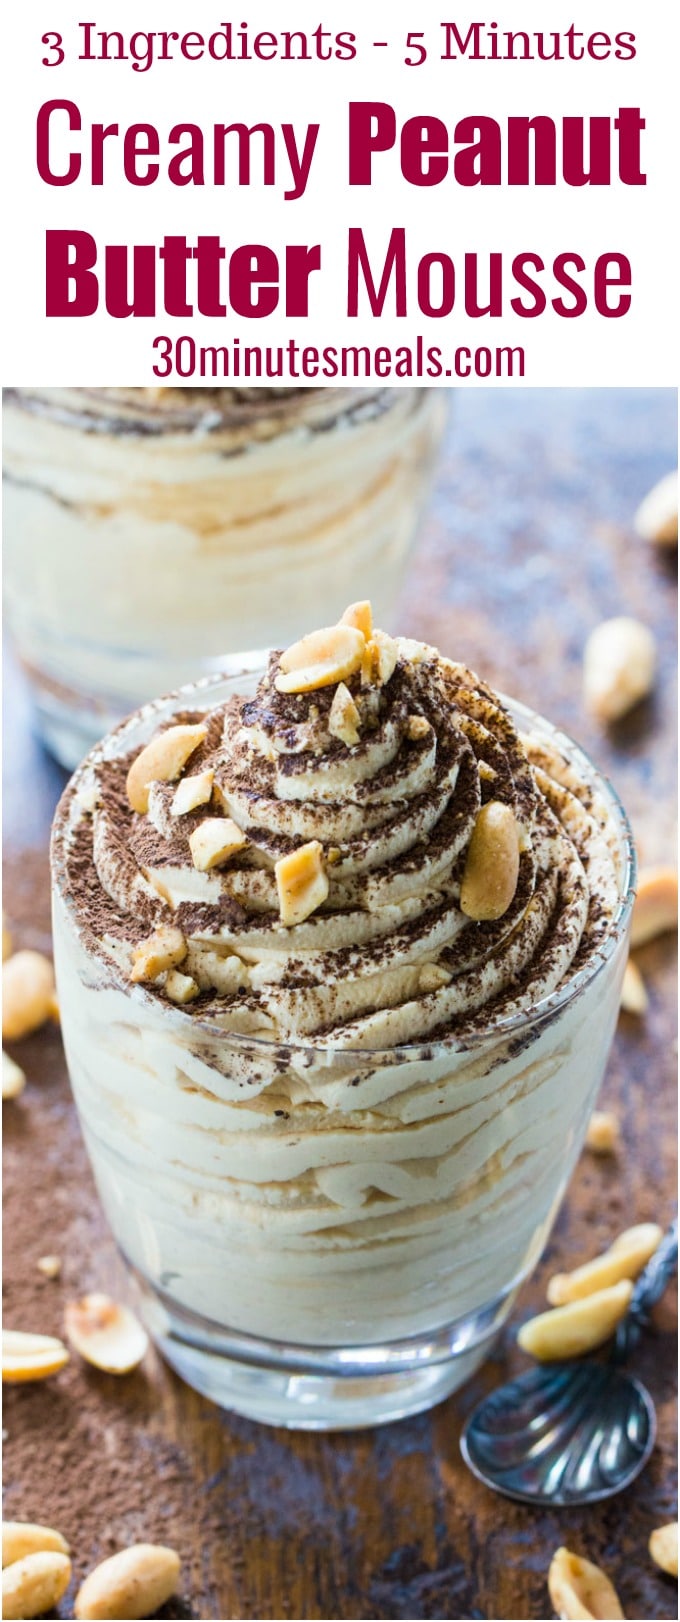 Easy Peanut Butter Mousse is made with just 3 ingredients in less than 5 minutes. Perfect to fix a quick peanut butter craving!